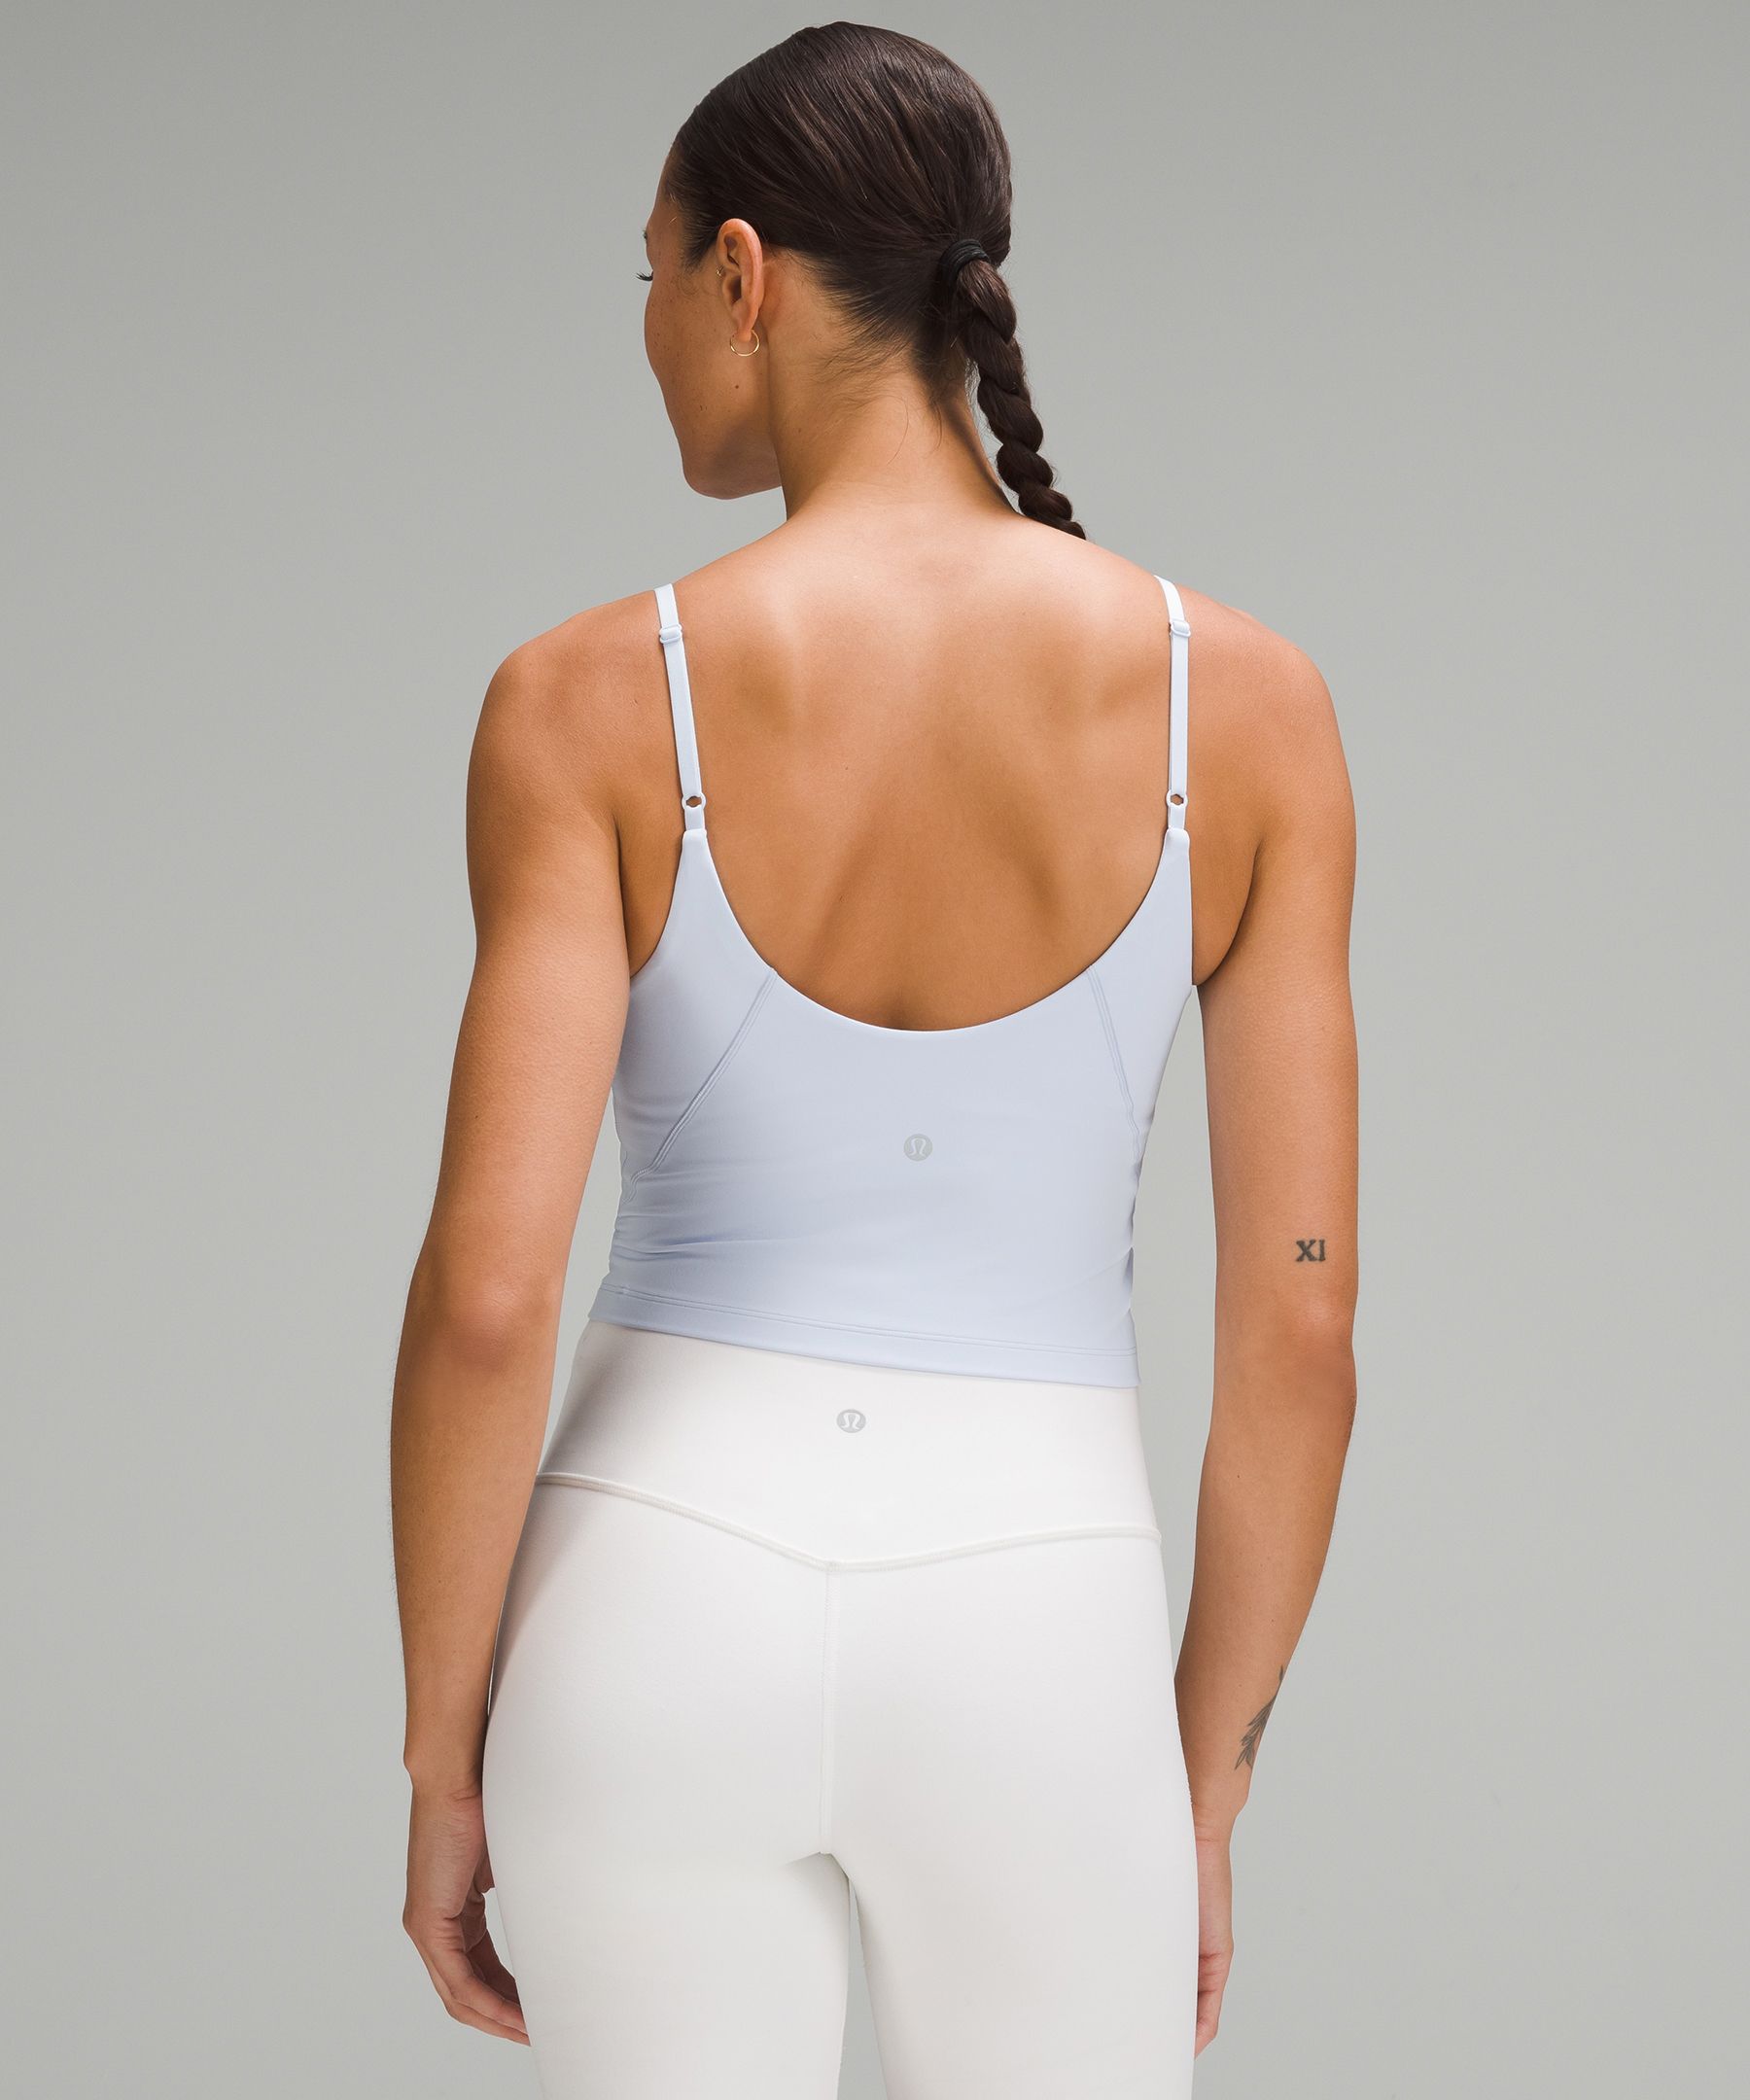 Lululemon Camo Align Tank Size 2 - $50 (26% Off Retail) - From Andra